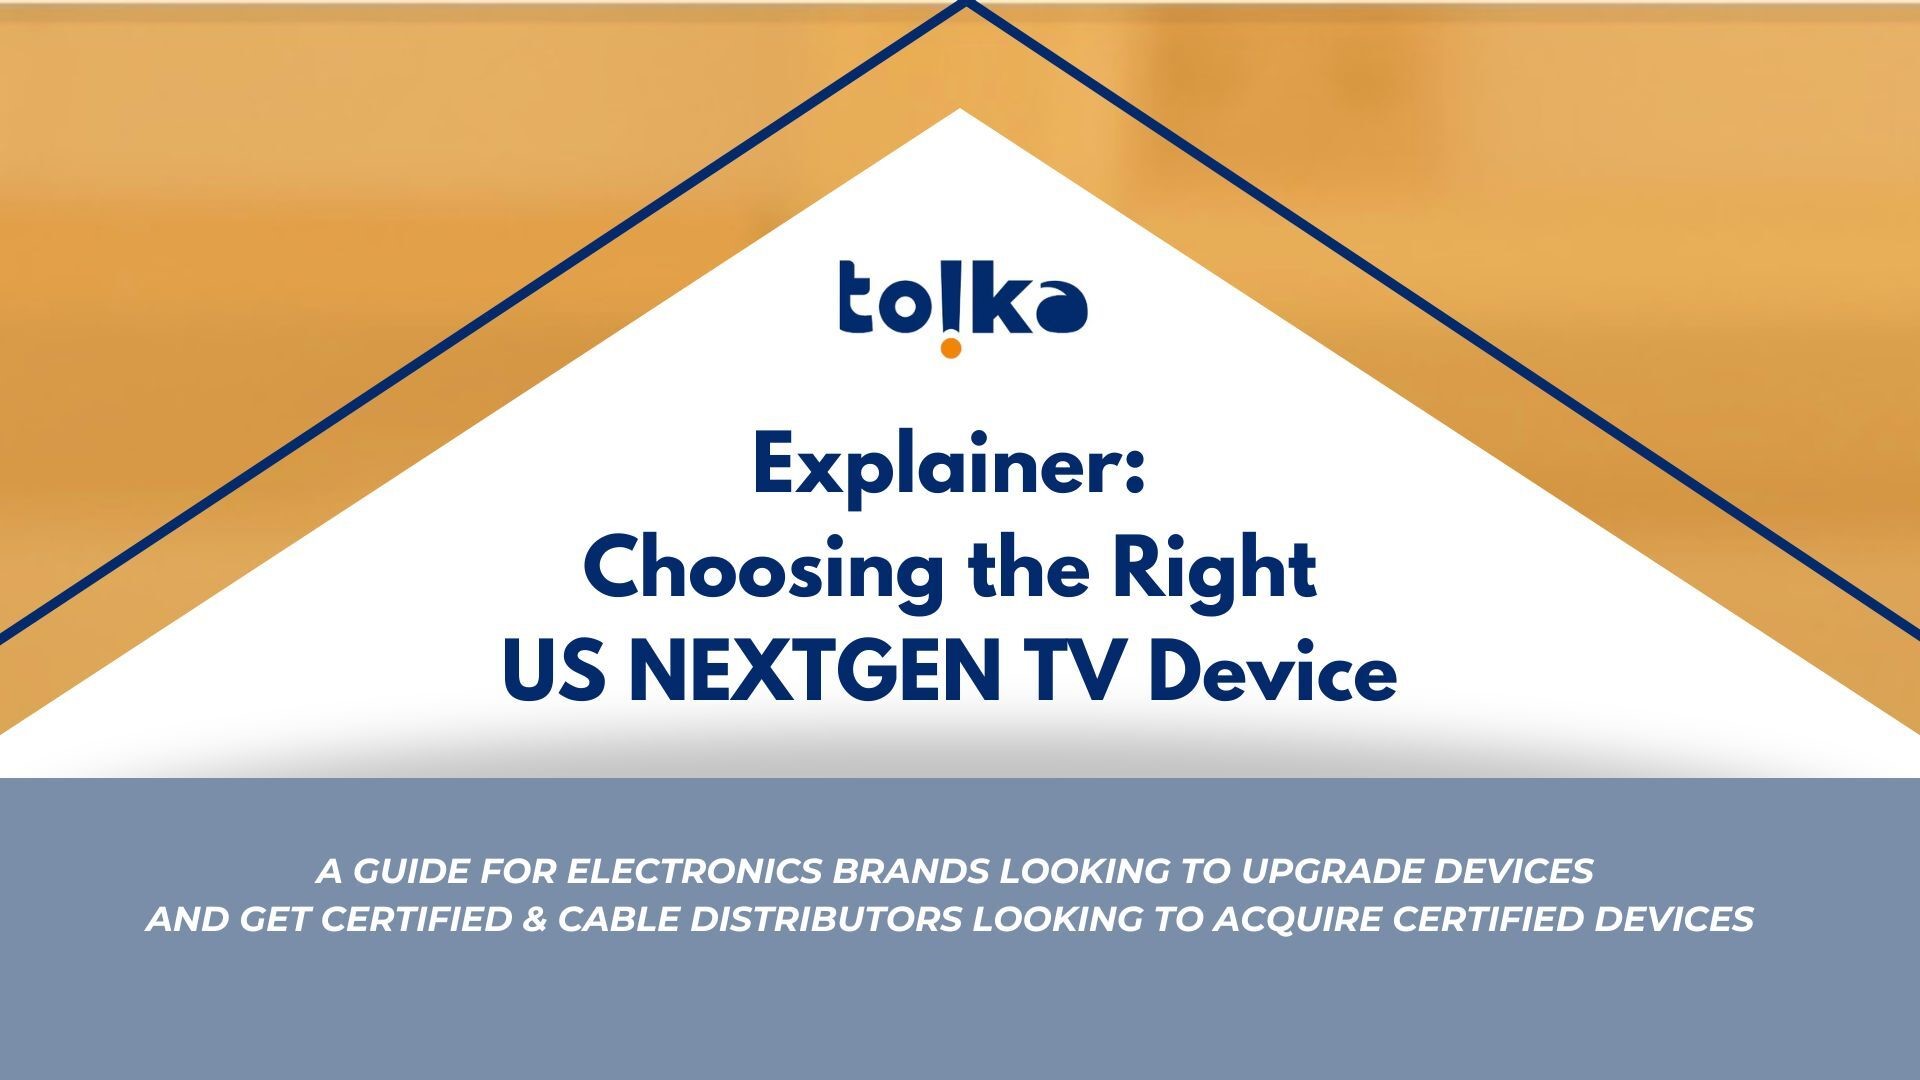 How to Choose the Right US NEXTGEN TV Device